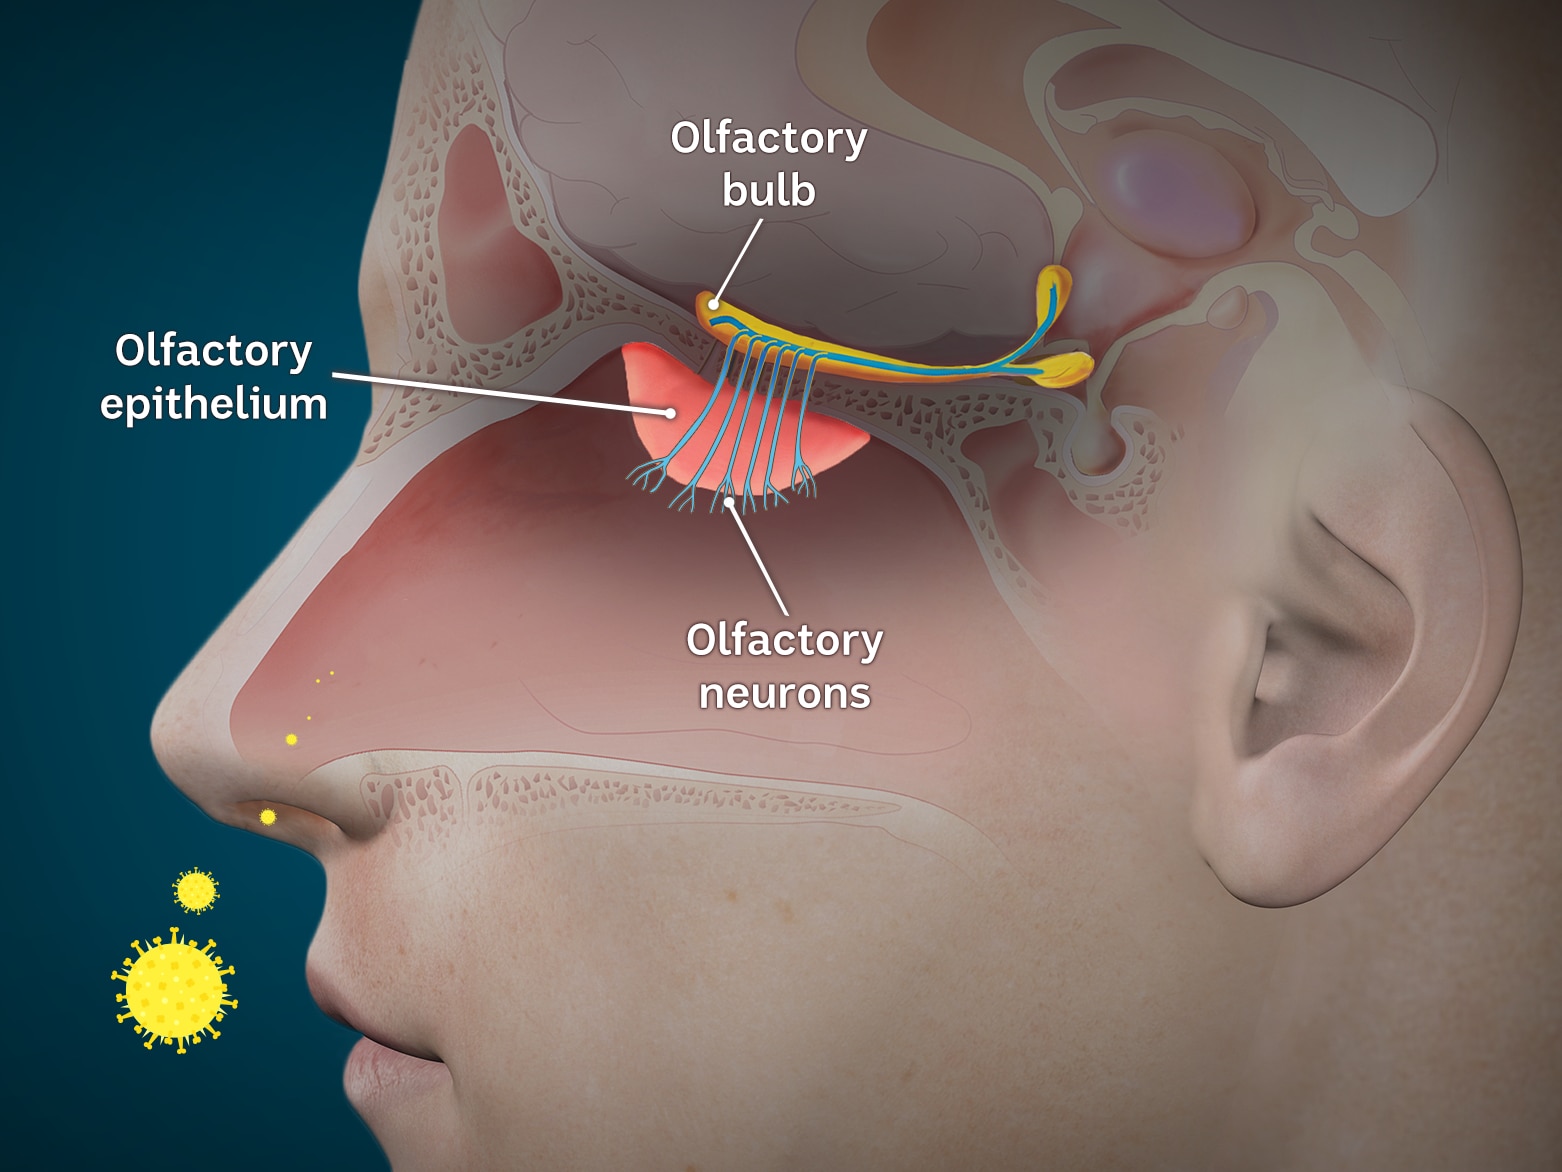 Illustration showing the anatomy of the olfactory system